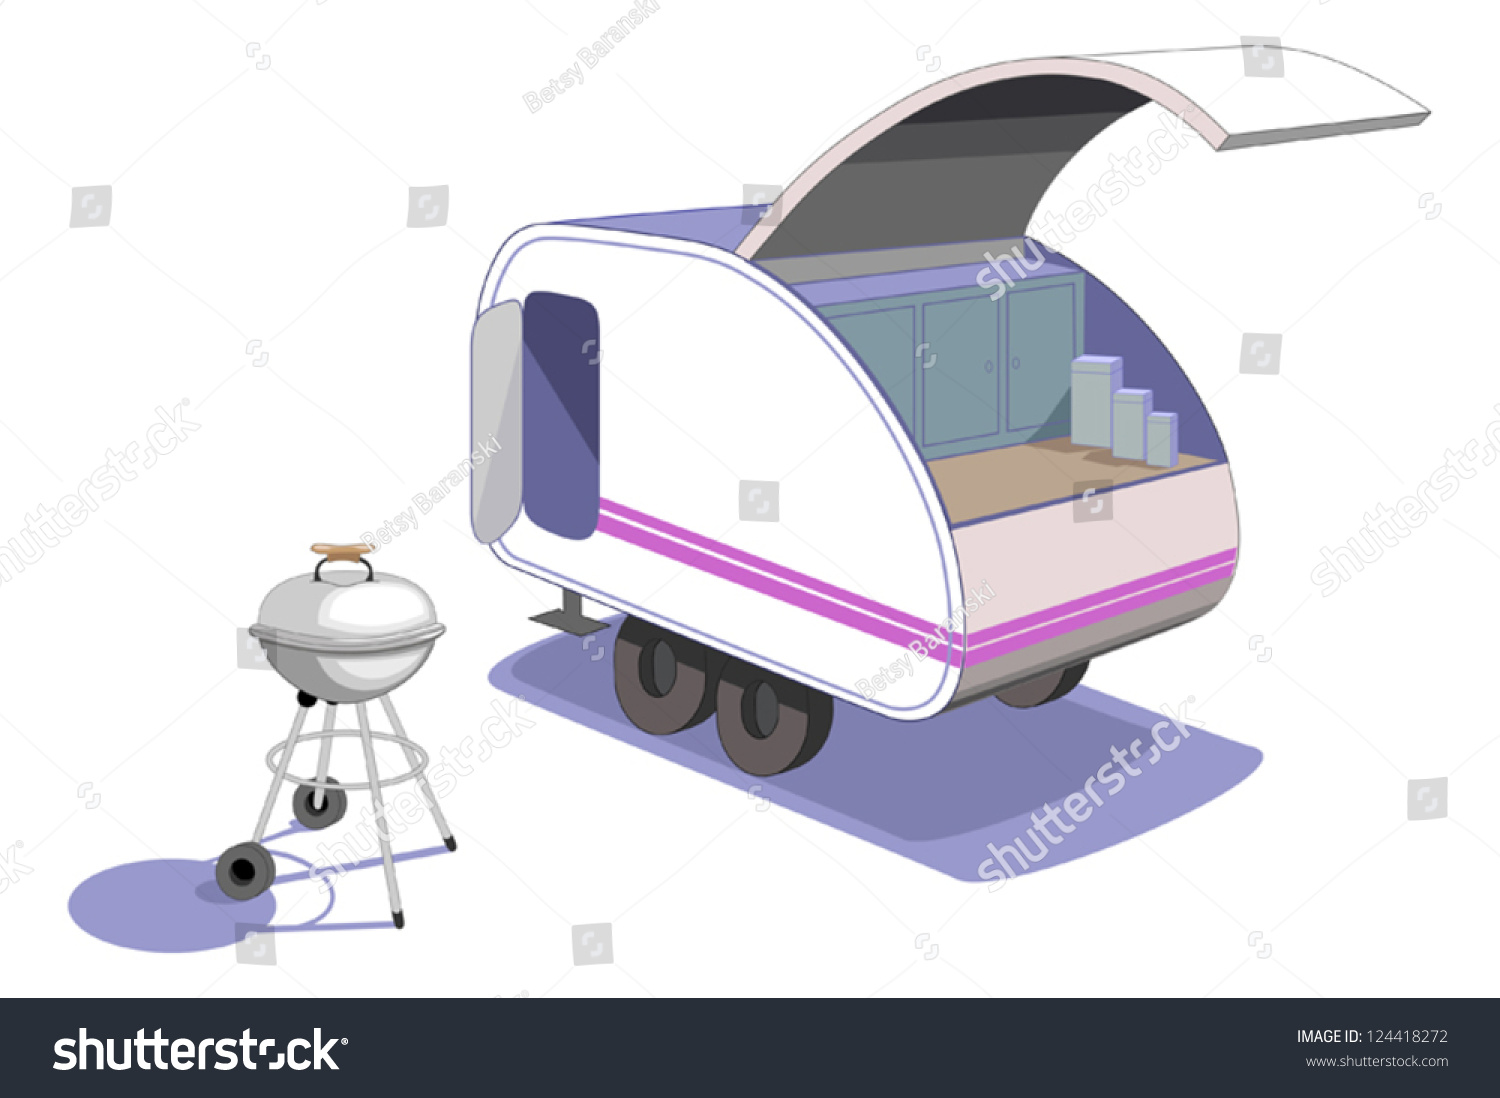 SVG of Tiny teardrop trailer- Parked and ready to cook supper, haul behind your car -a fun way to go camping. Vector with no gradients or 3D effects, easy to edit! svg